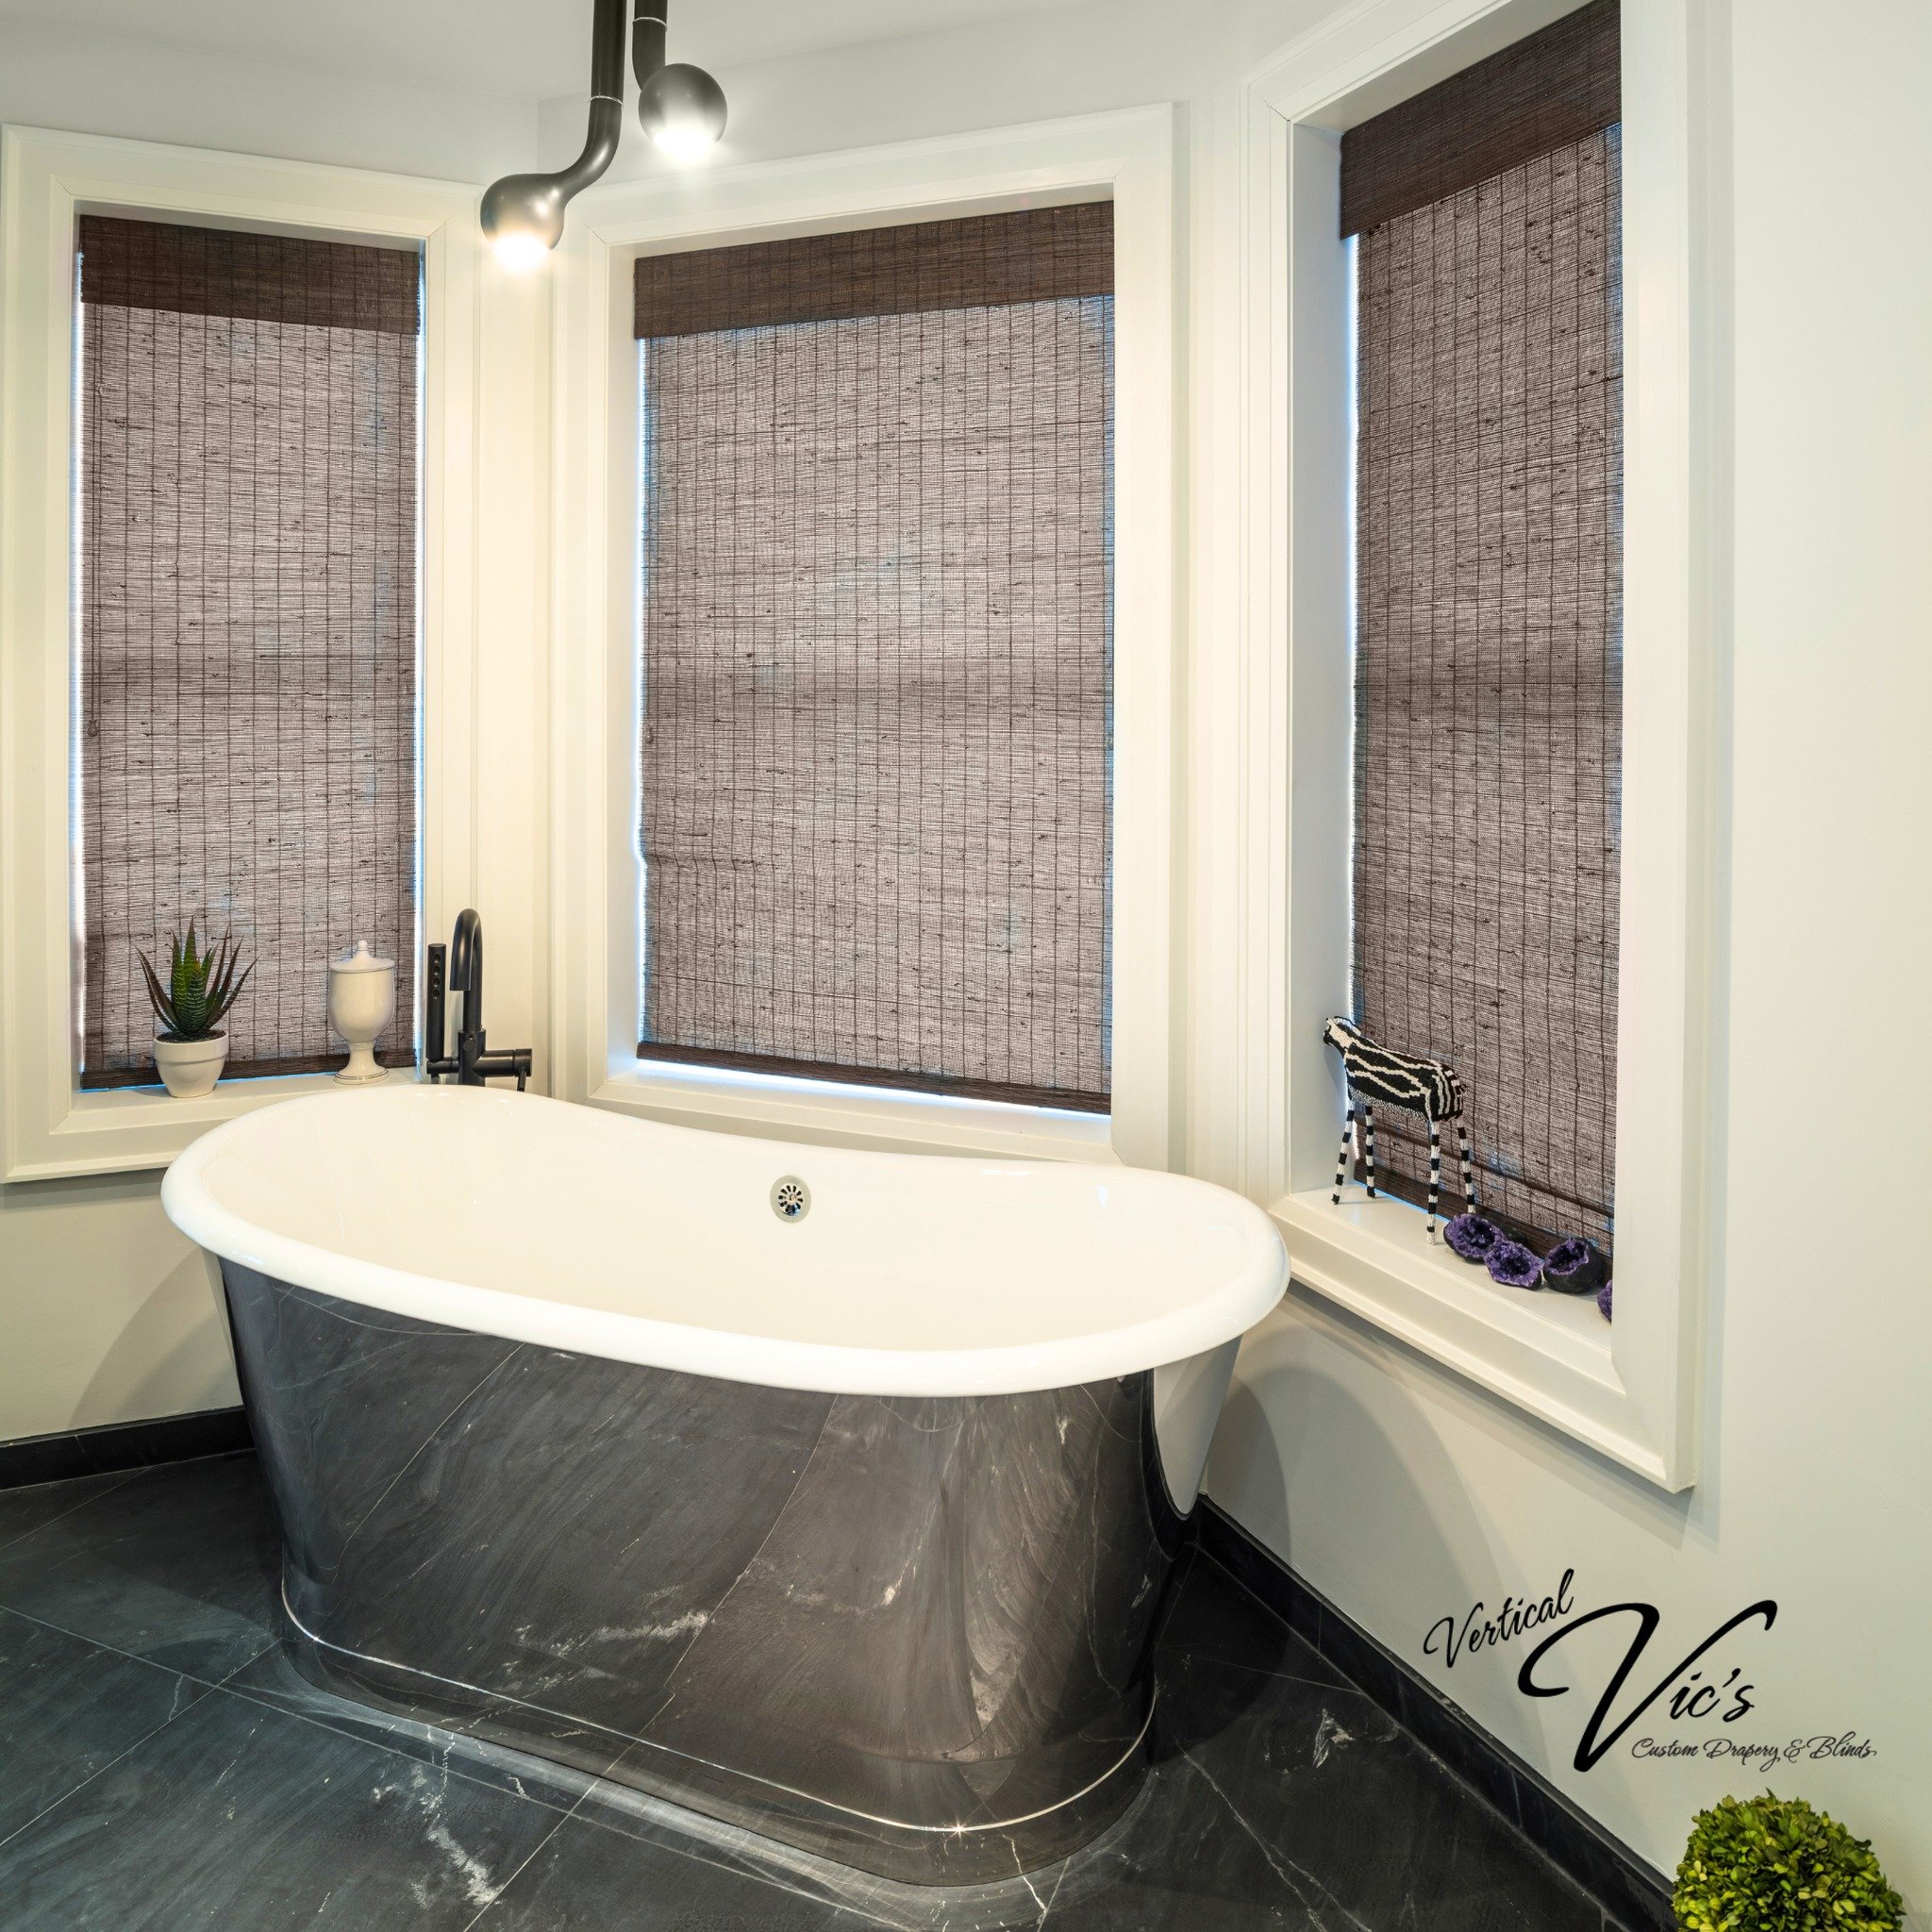 Transform your space effortlessly with our tailored window coverings! 🏡 Whether you're into minimalist chic or cozy vibes, we've got you covered. Let us bring your vision to life with our wide selection of stylish options. Say goodbye to bland windo